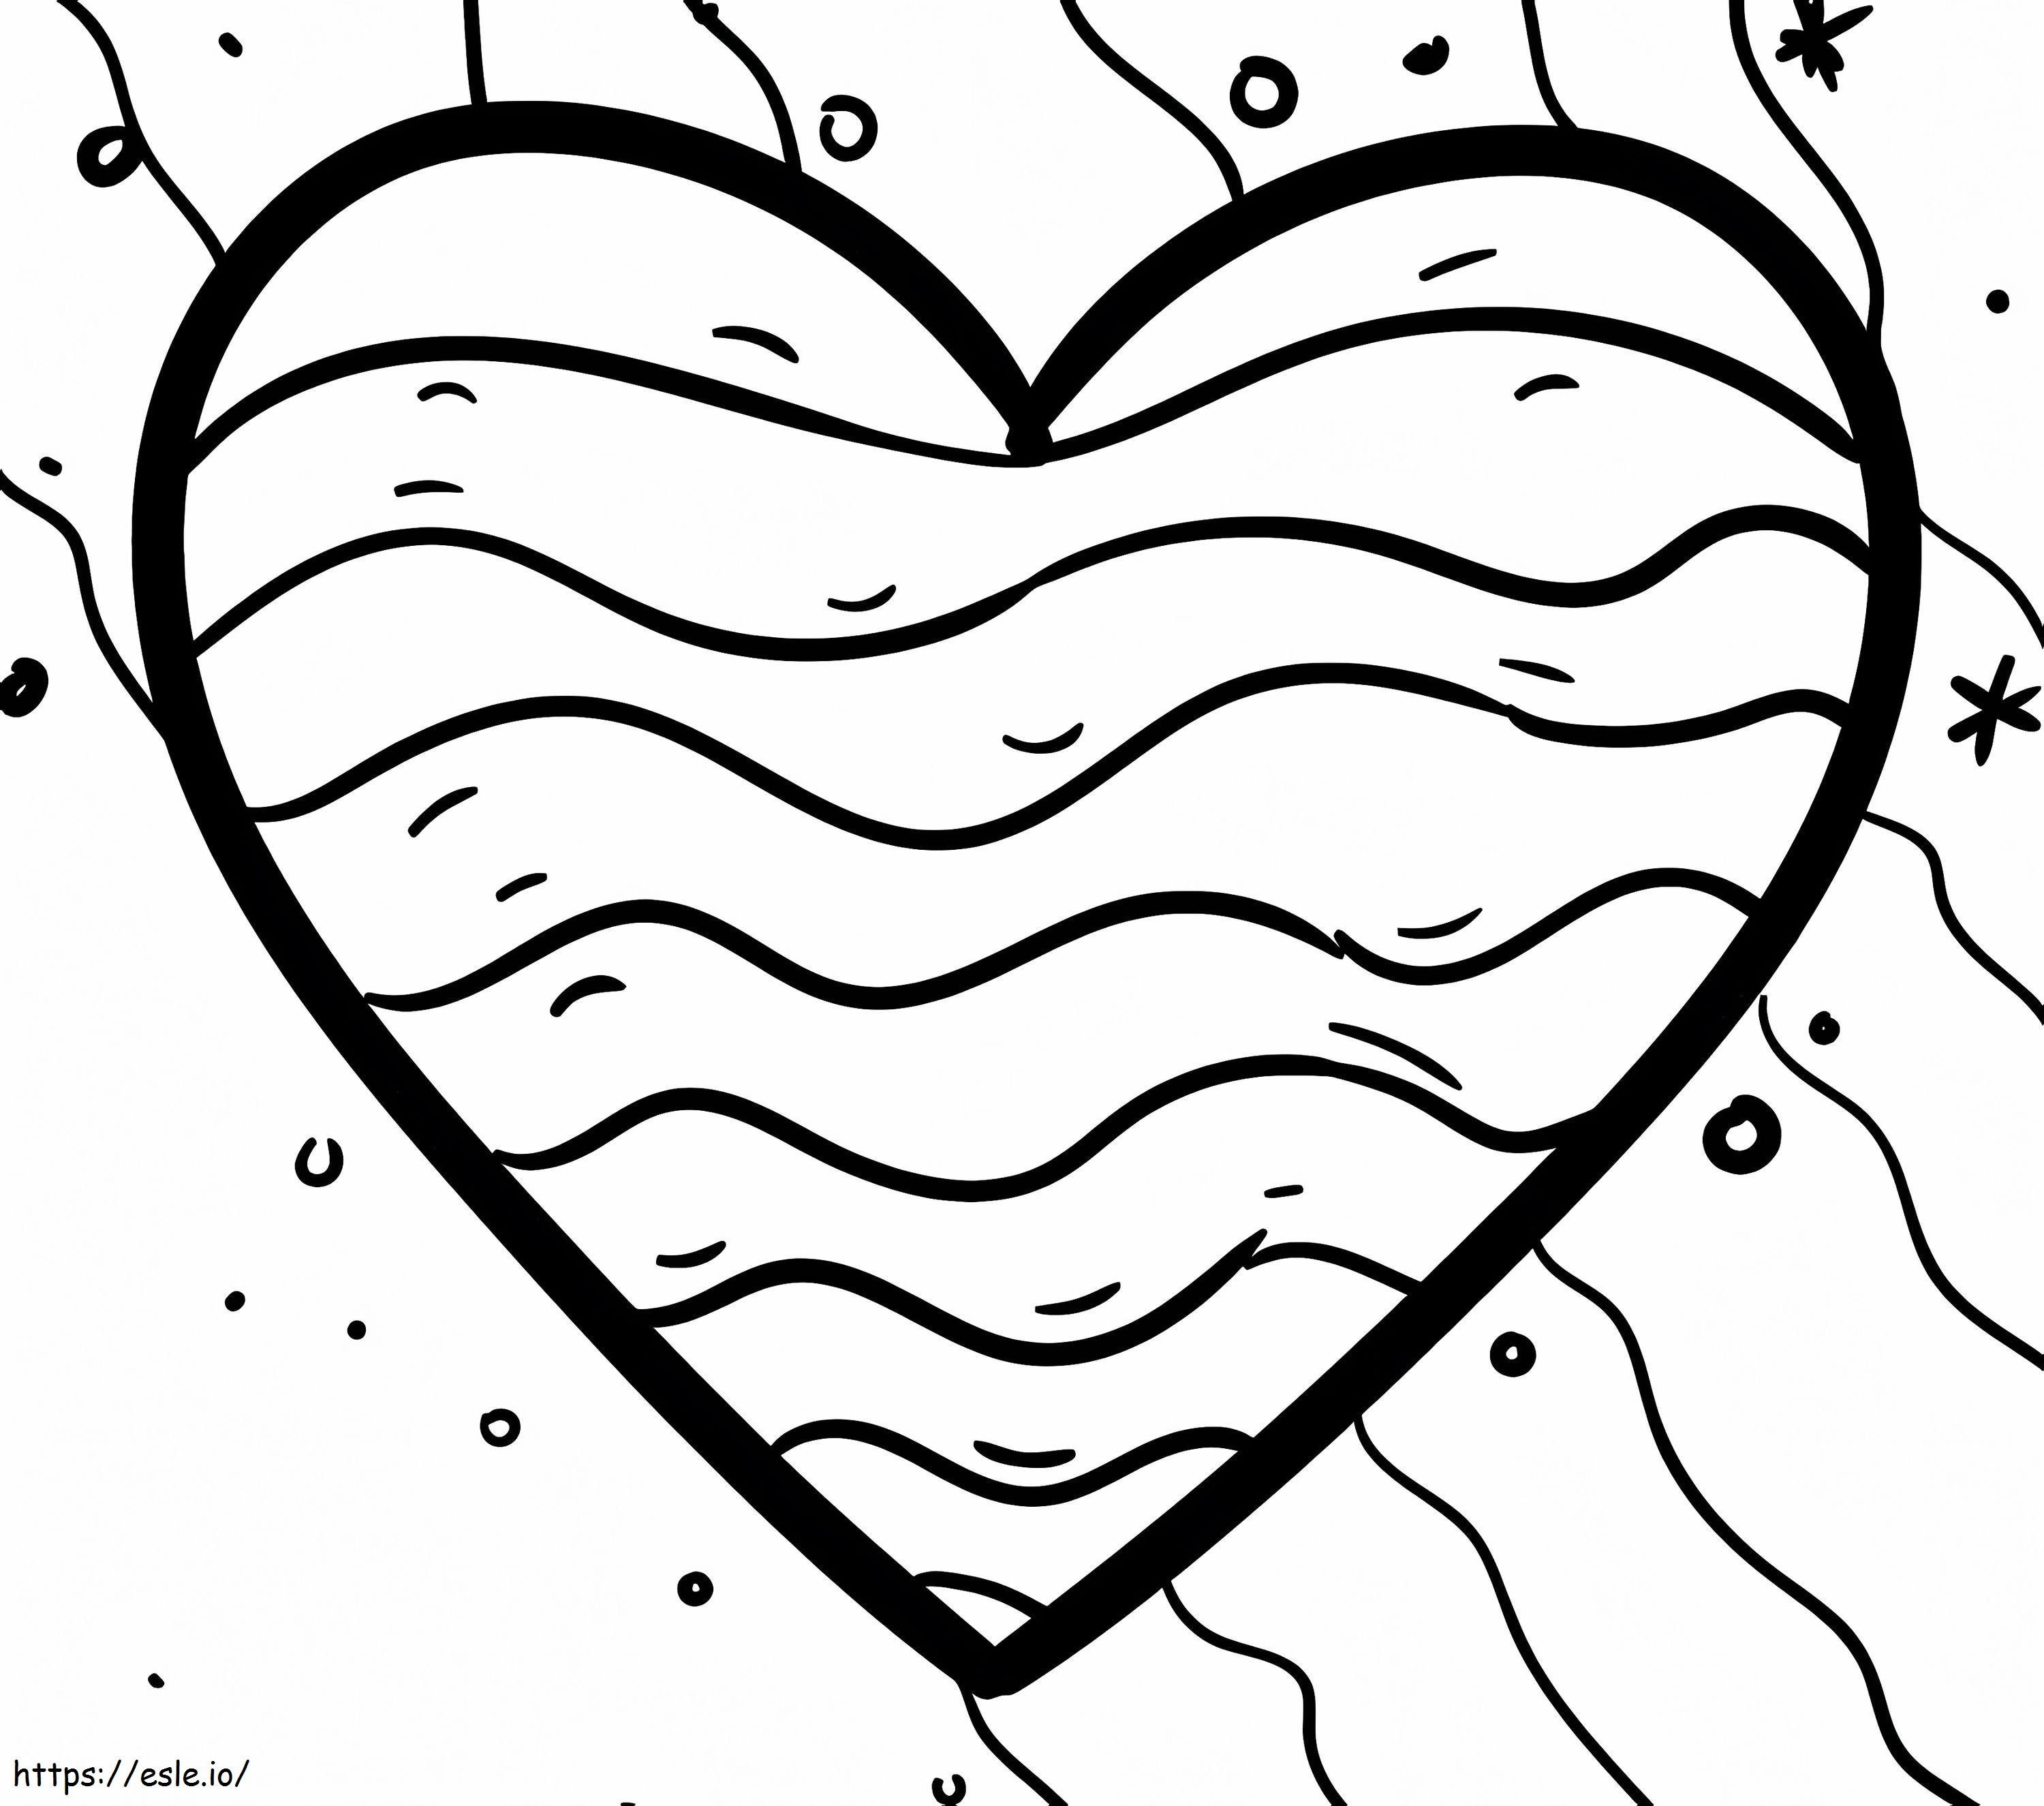 Heart Design coloring page